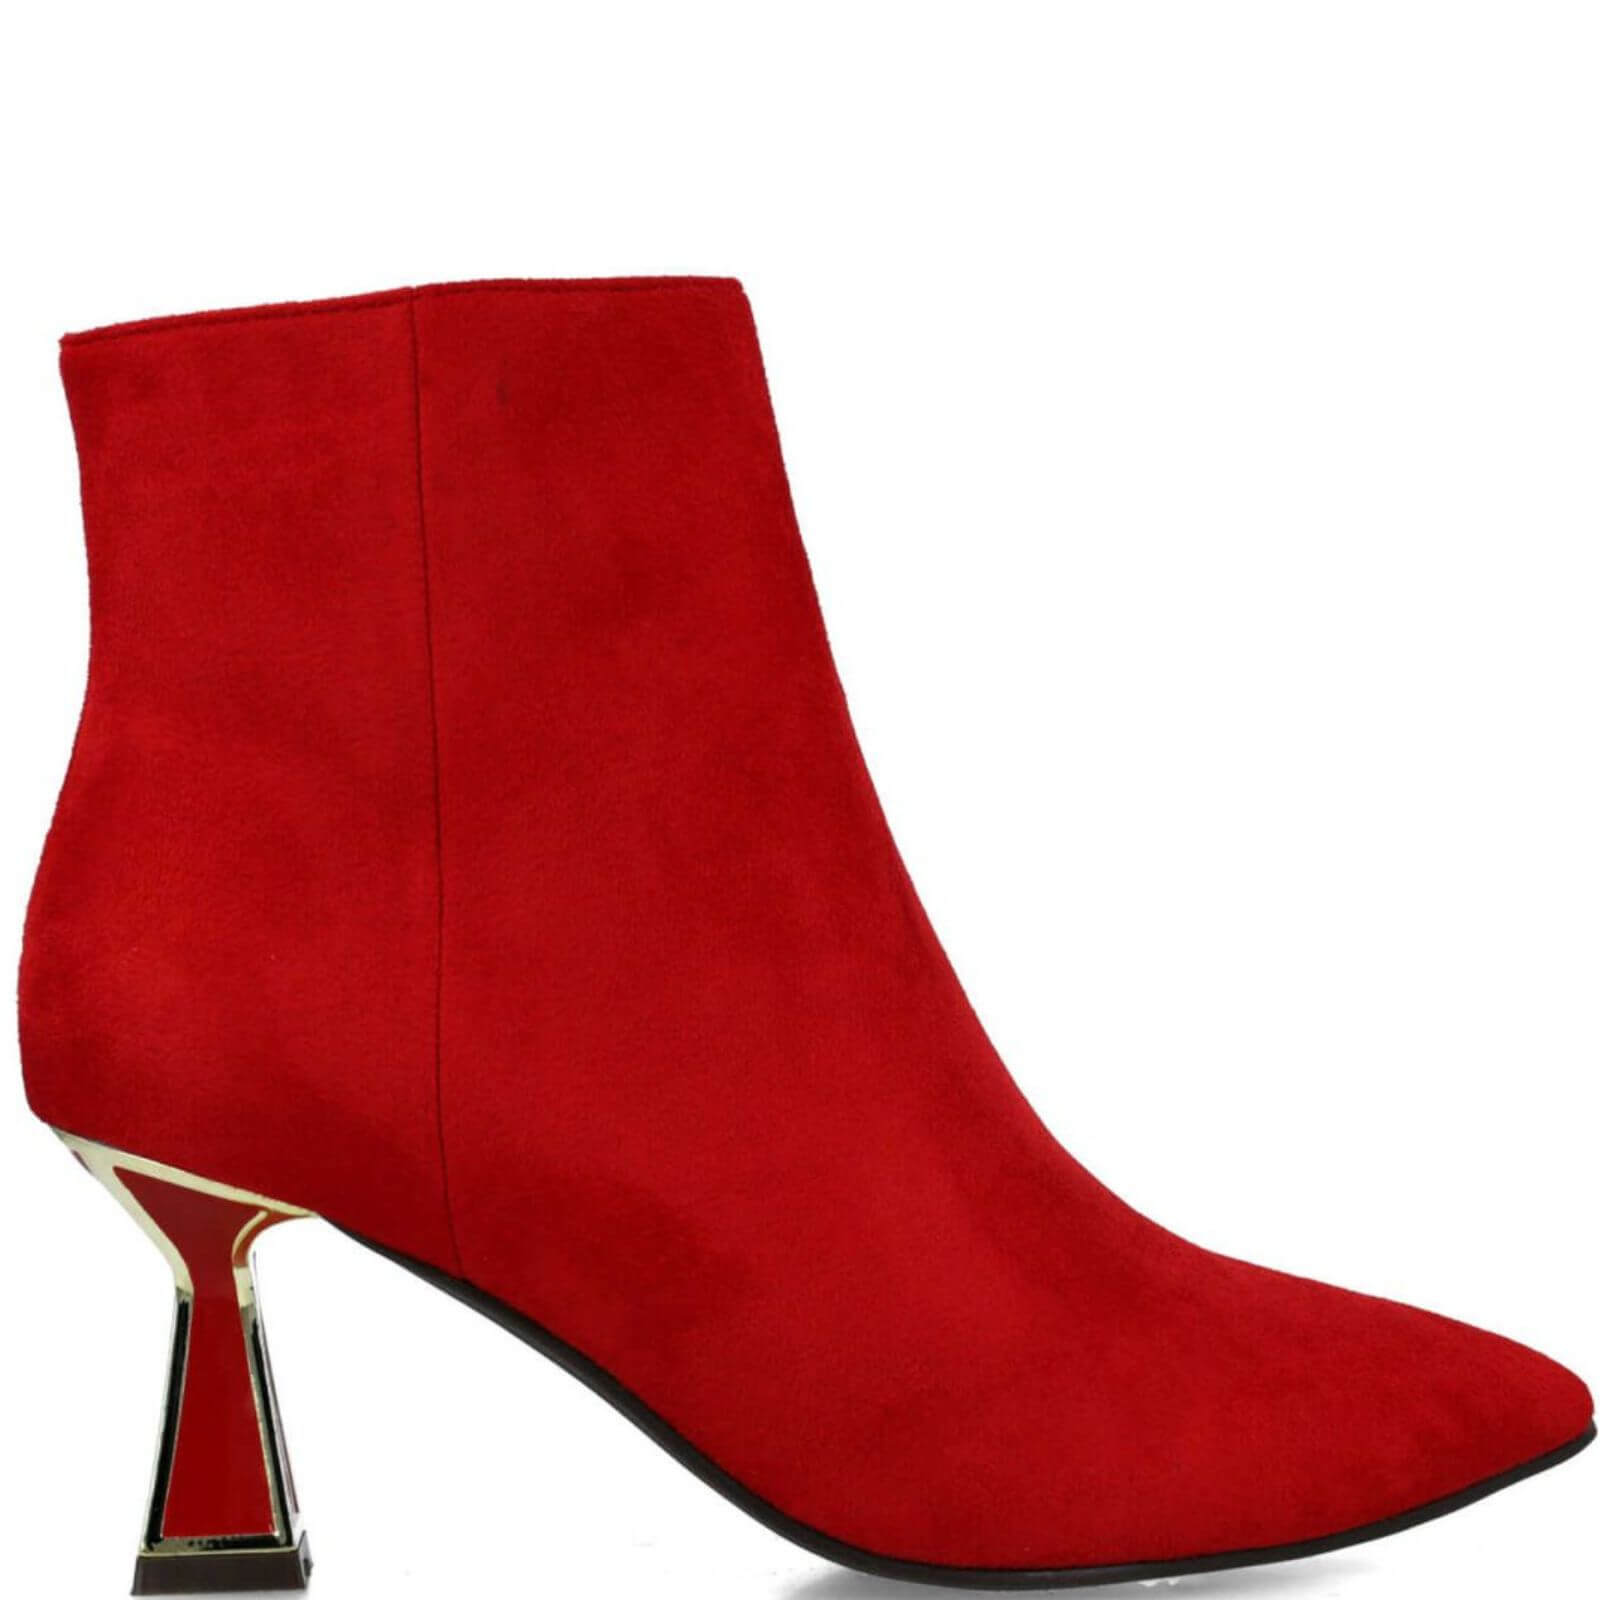 Red Ankle Boots Front | Ankle Boots Red Wine Woman | Red Ankle Boots Women  - Big Size - Aliexpress